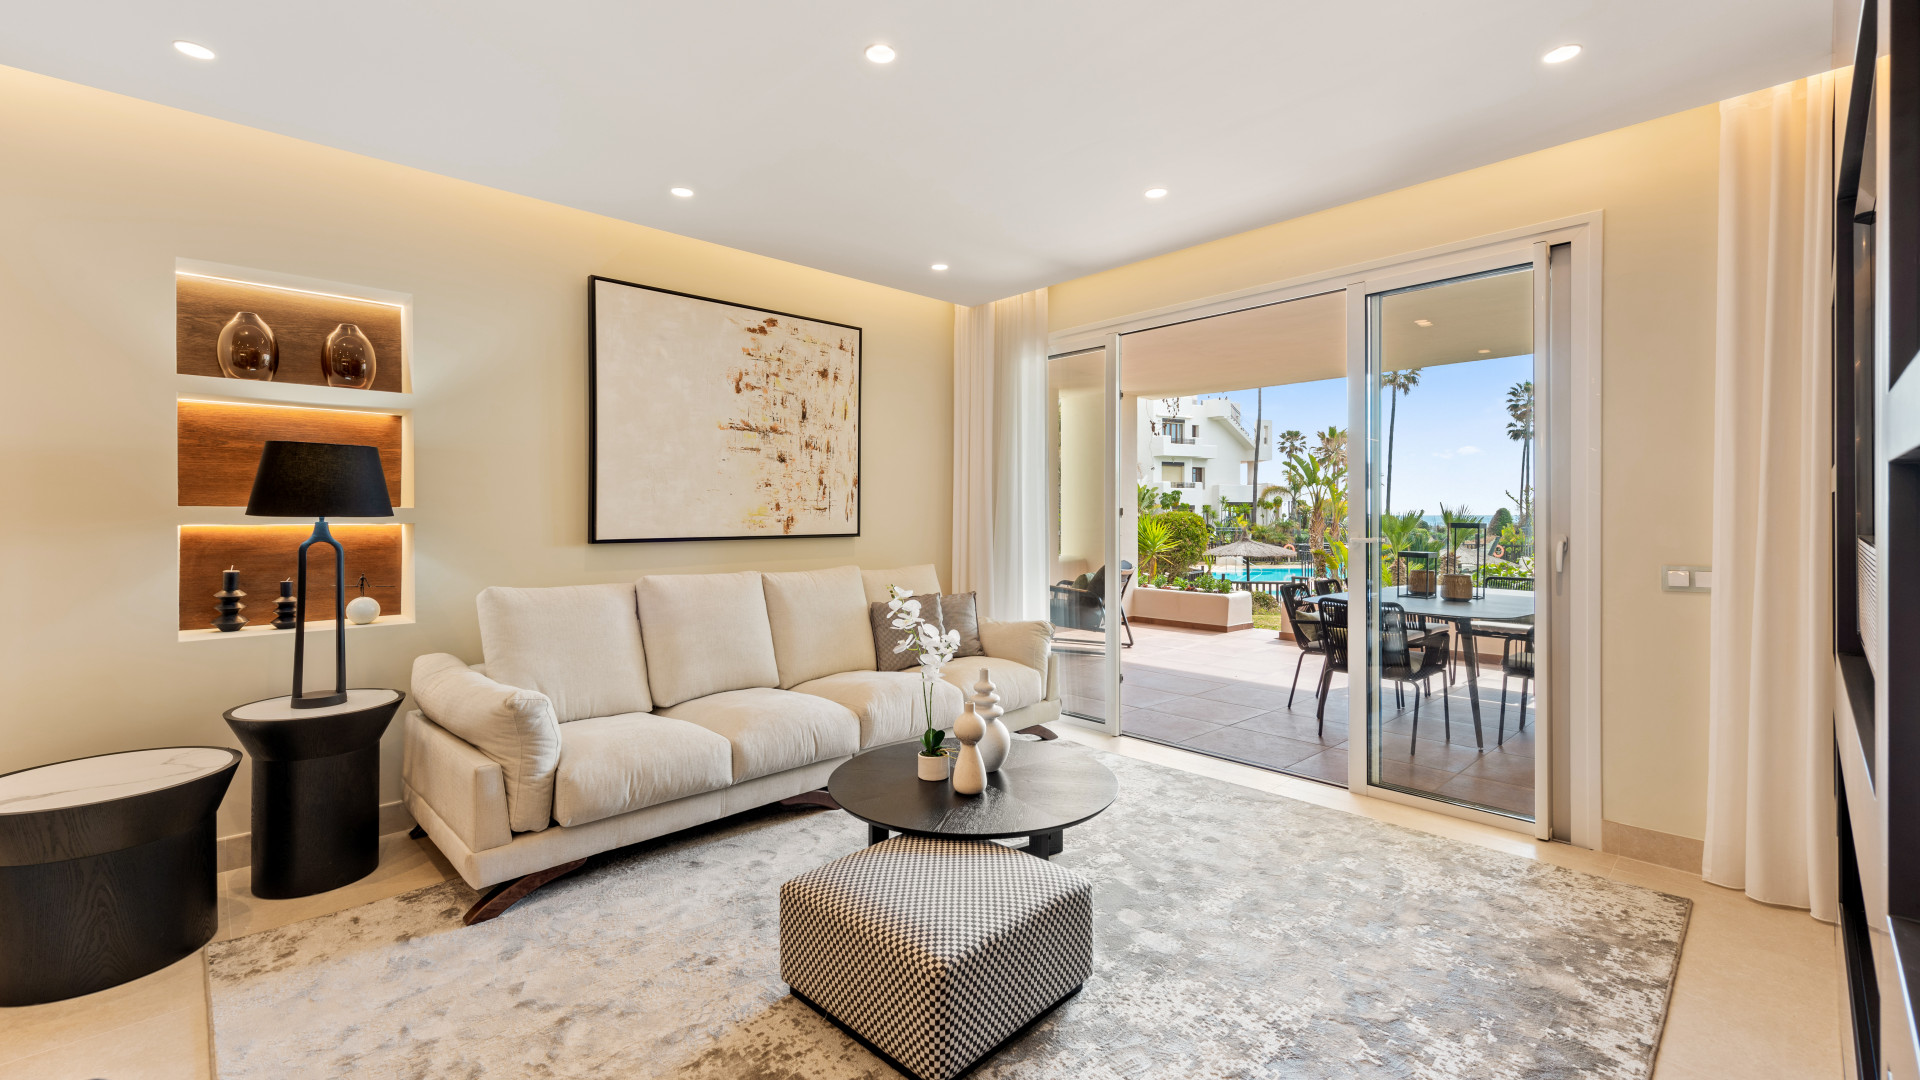 Fully refurbished ground floor apartment in a luxurious first line beach community located at one of the finest beaches in Estepona